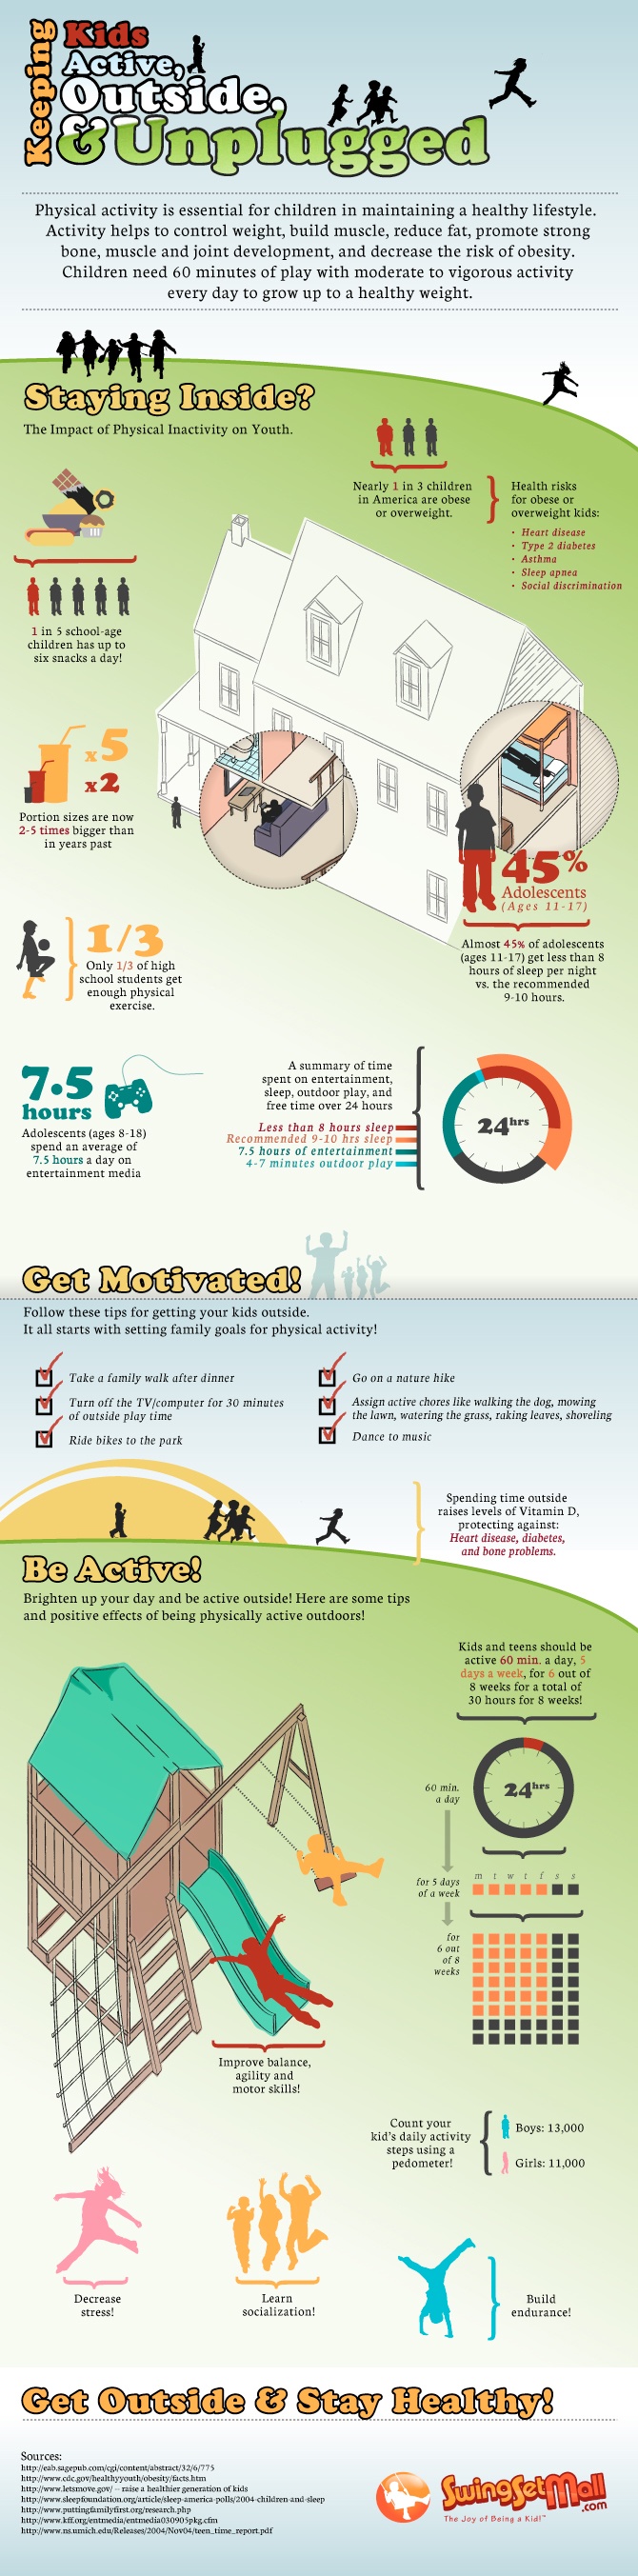 Keeping Kids Active, Outside & Unplugged Infographic